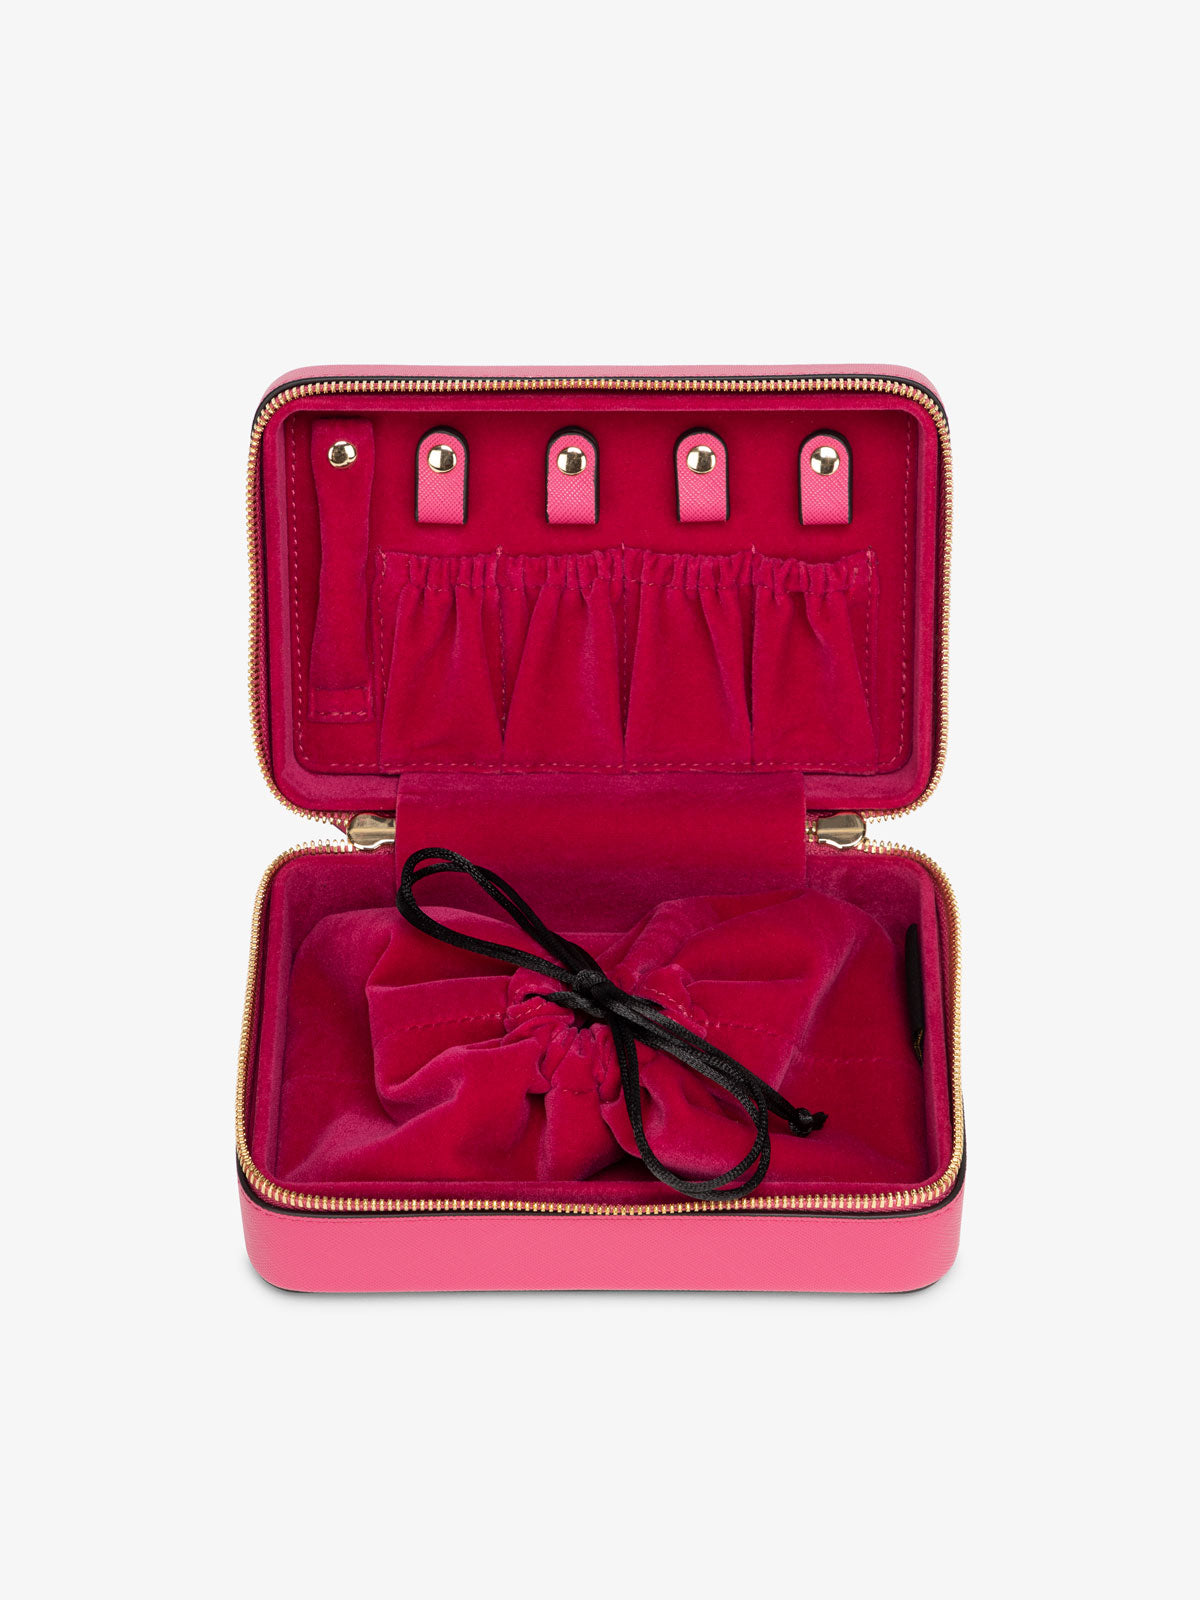 travel zippered jewelry box for women in pink dragonfruit